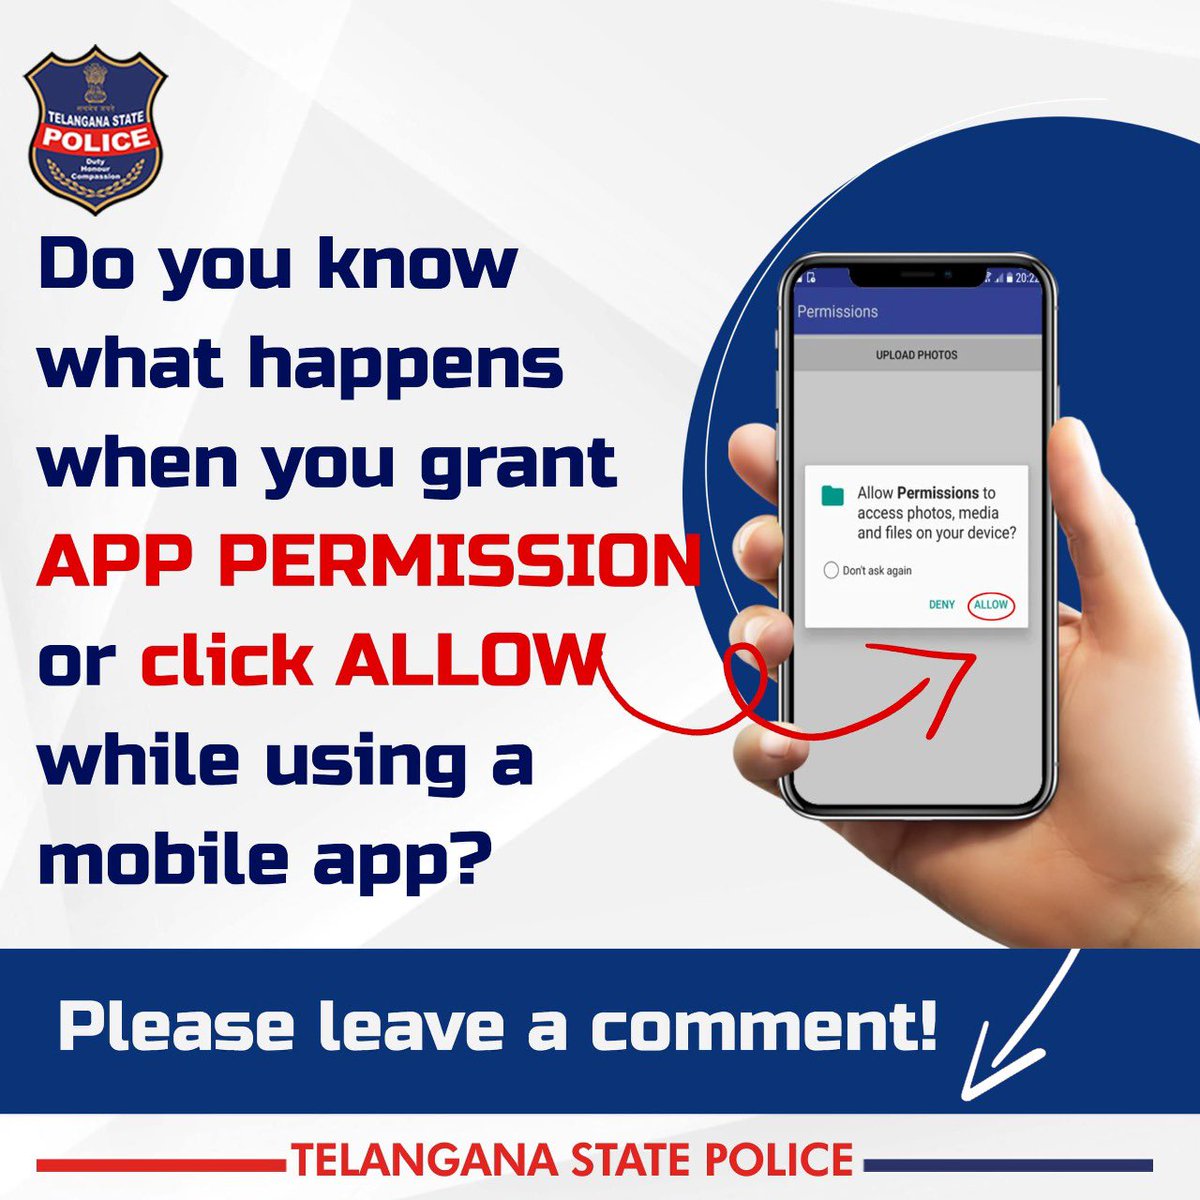 What happens when you tap 'Allow' on a mobile app? Leave a comment below. If you have been a victim of cybercrime, call 1930 and file a complaint at cybercrime.gov.in. #cybersecurity #cybercrime #awarenessofcybersecurity